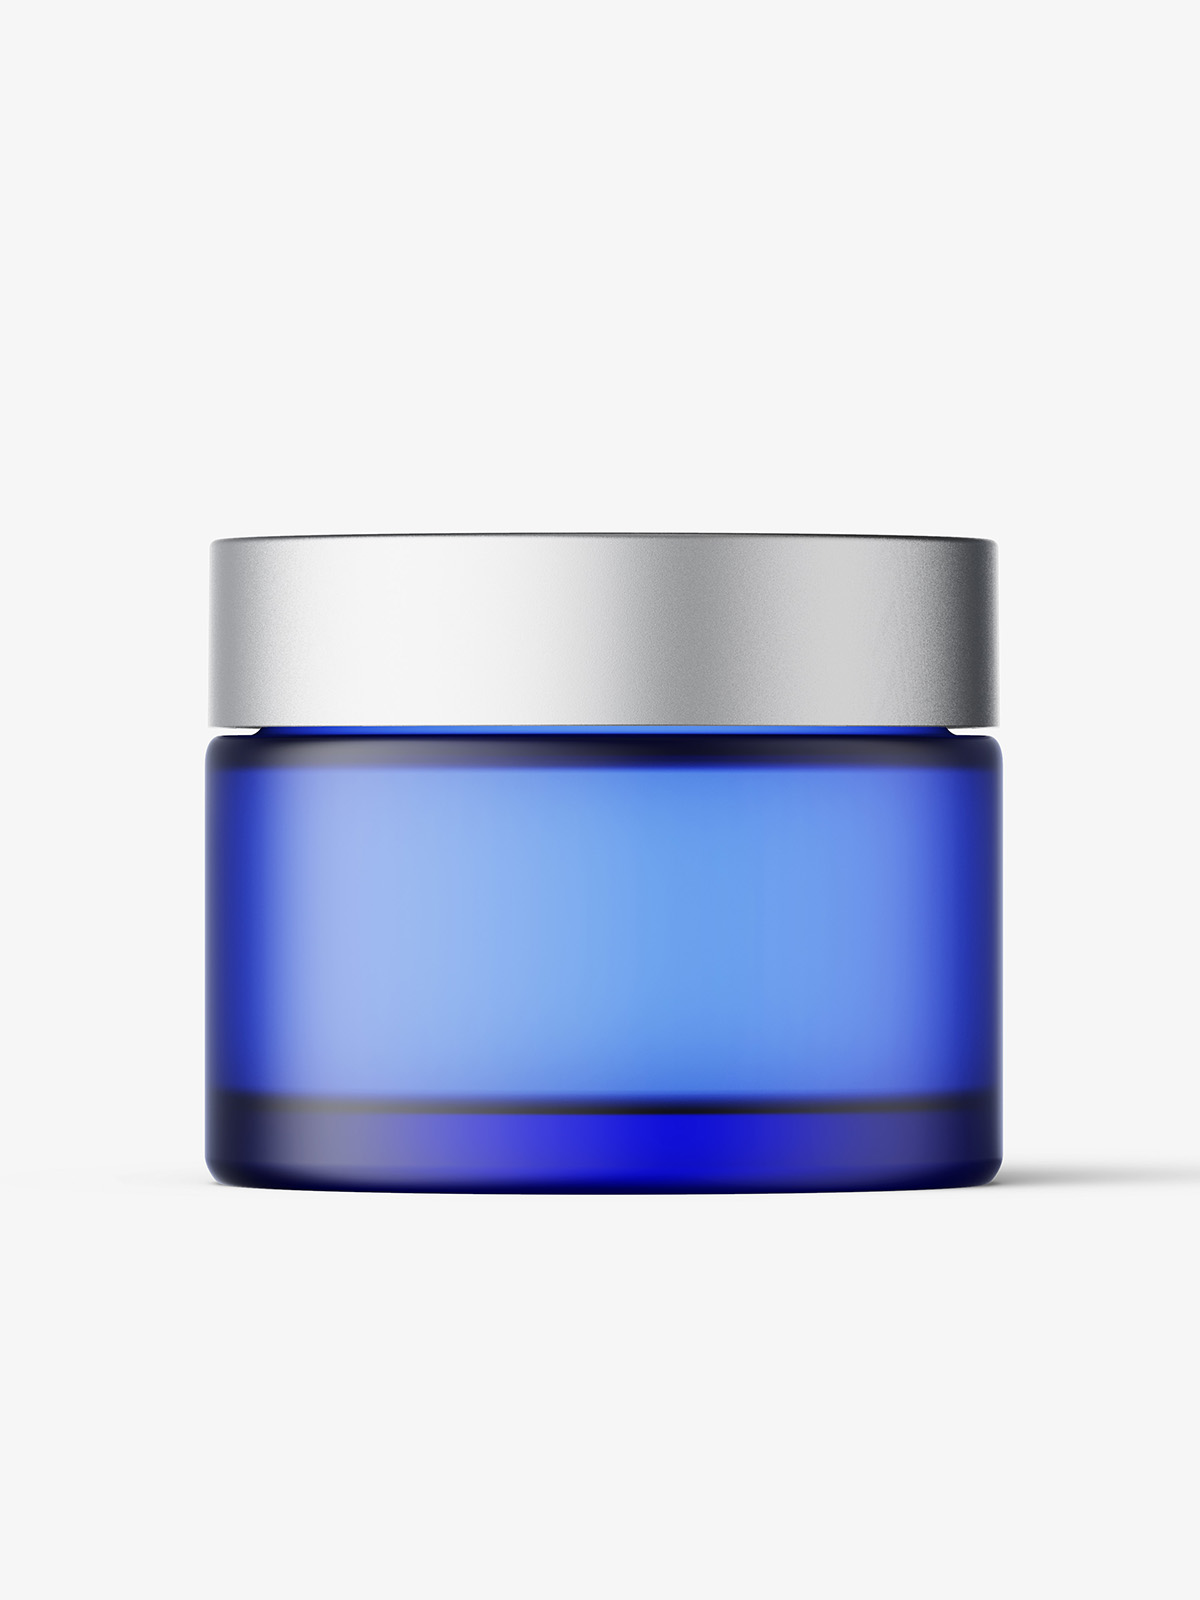 Download Frosted Blue Cosmetic Jar With Metallic Cap Mockup Smarty Mockups